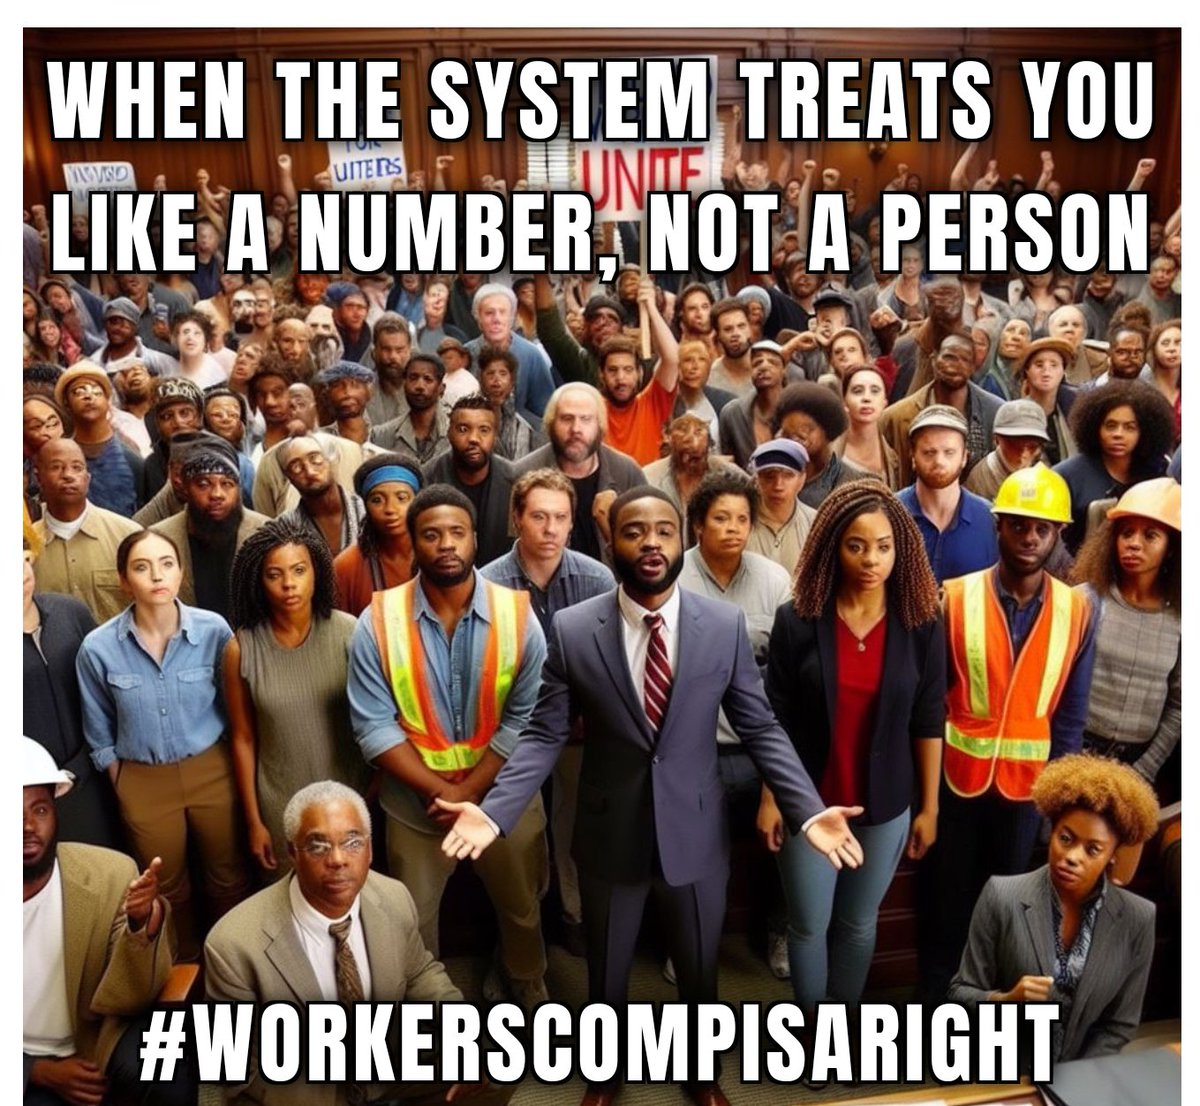 When the system treats you like a number, not a person. Every worker deserves respect and fair treatment! #WorkersCompIsARight #InjuredWorkers #Fairness